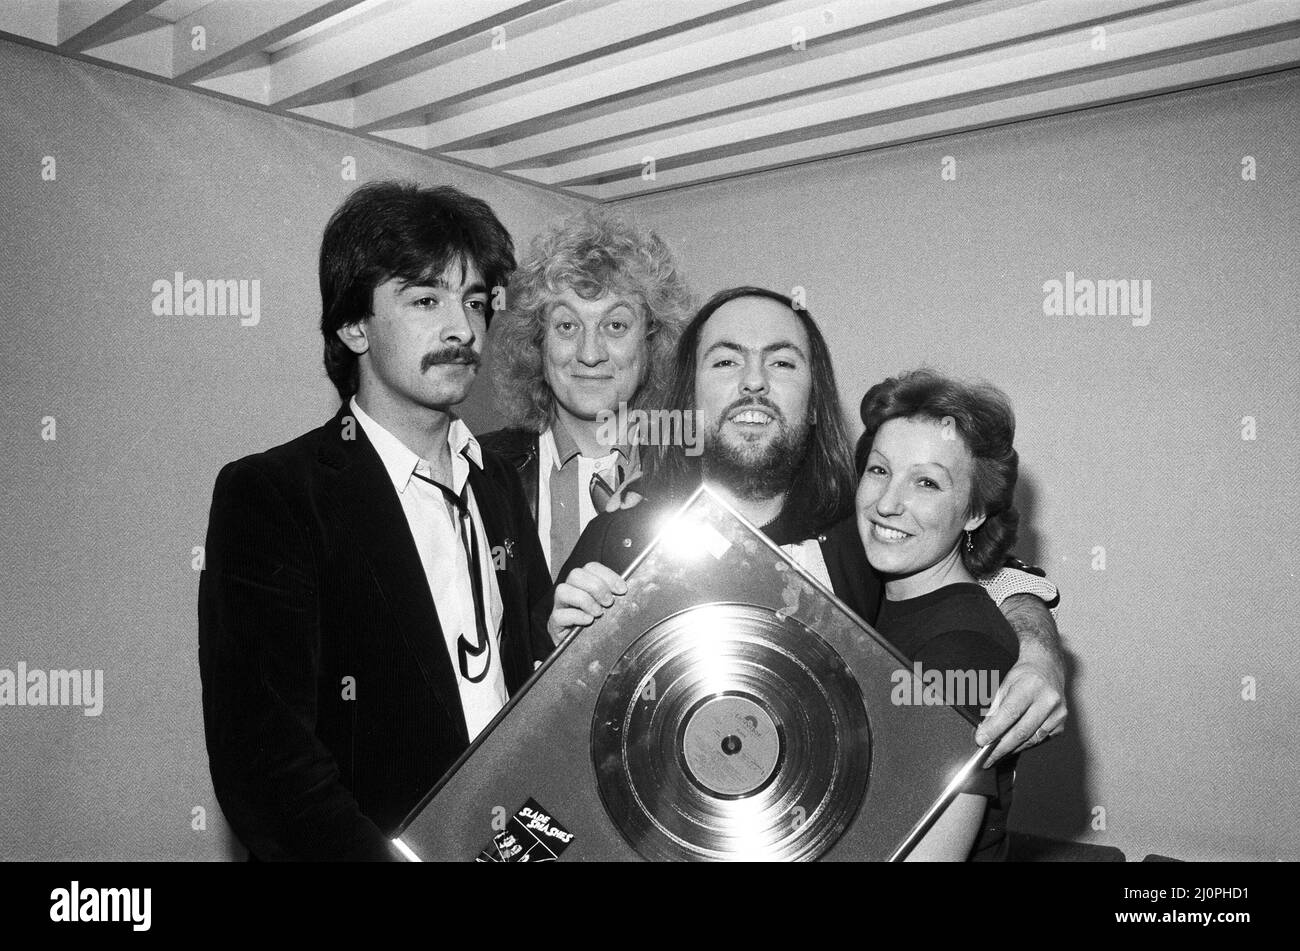 Midland pop stars Slade raised £385 when they appeared on Central TV's Saturday Starship and auctioned a gold disc copy of Slade's Smash Hits, in aid of the Ethiopian famine appeal. Slade's Dave Hill and Noddy Holder are pictured with fan Frances Tucker from Rushden. 1st December 1984. Stock Photo